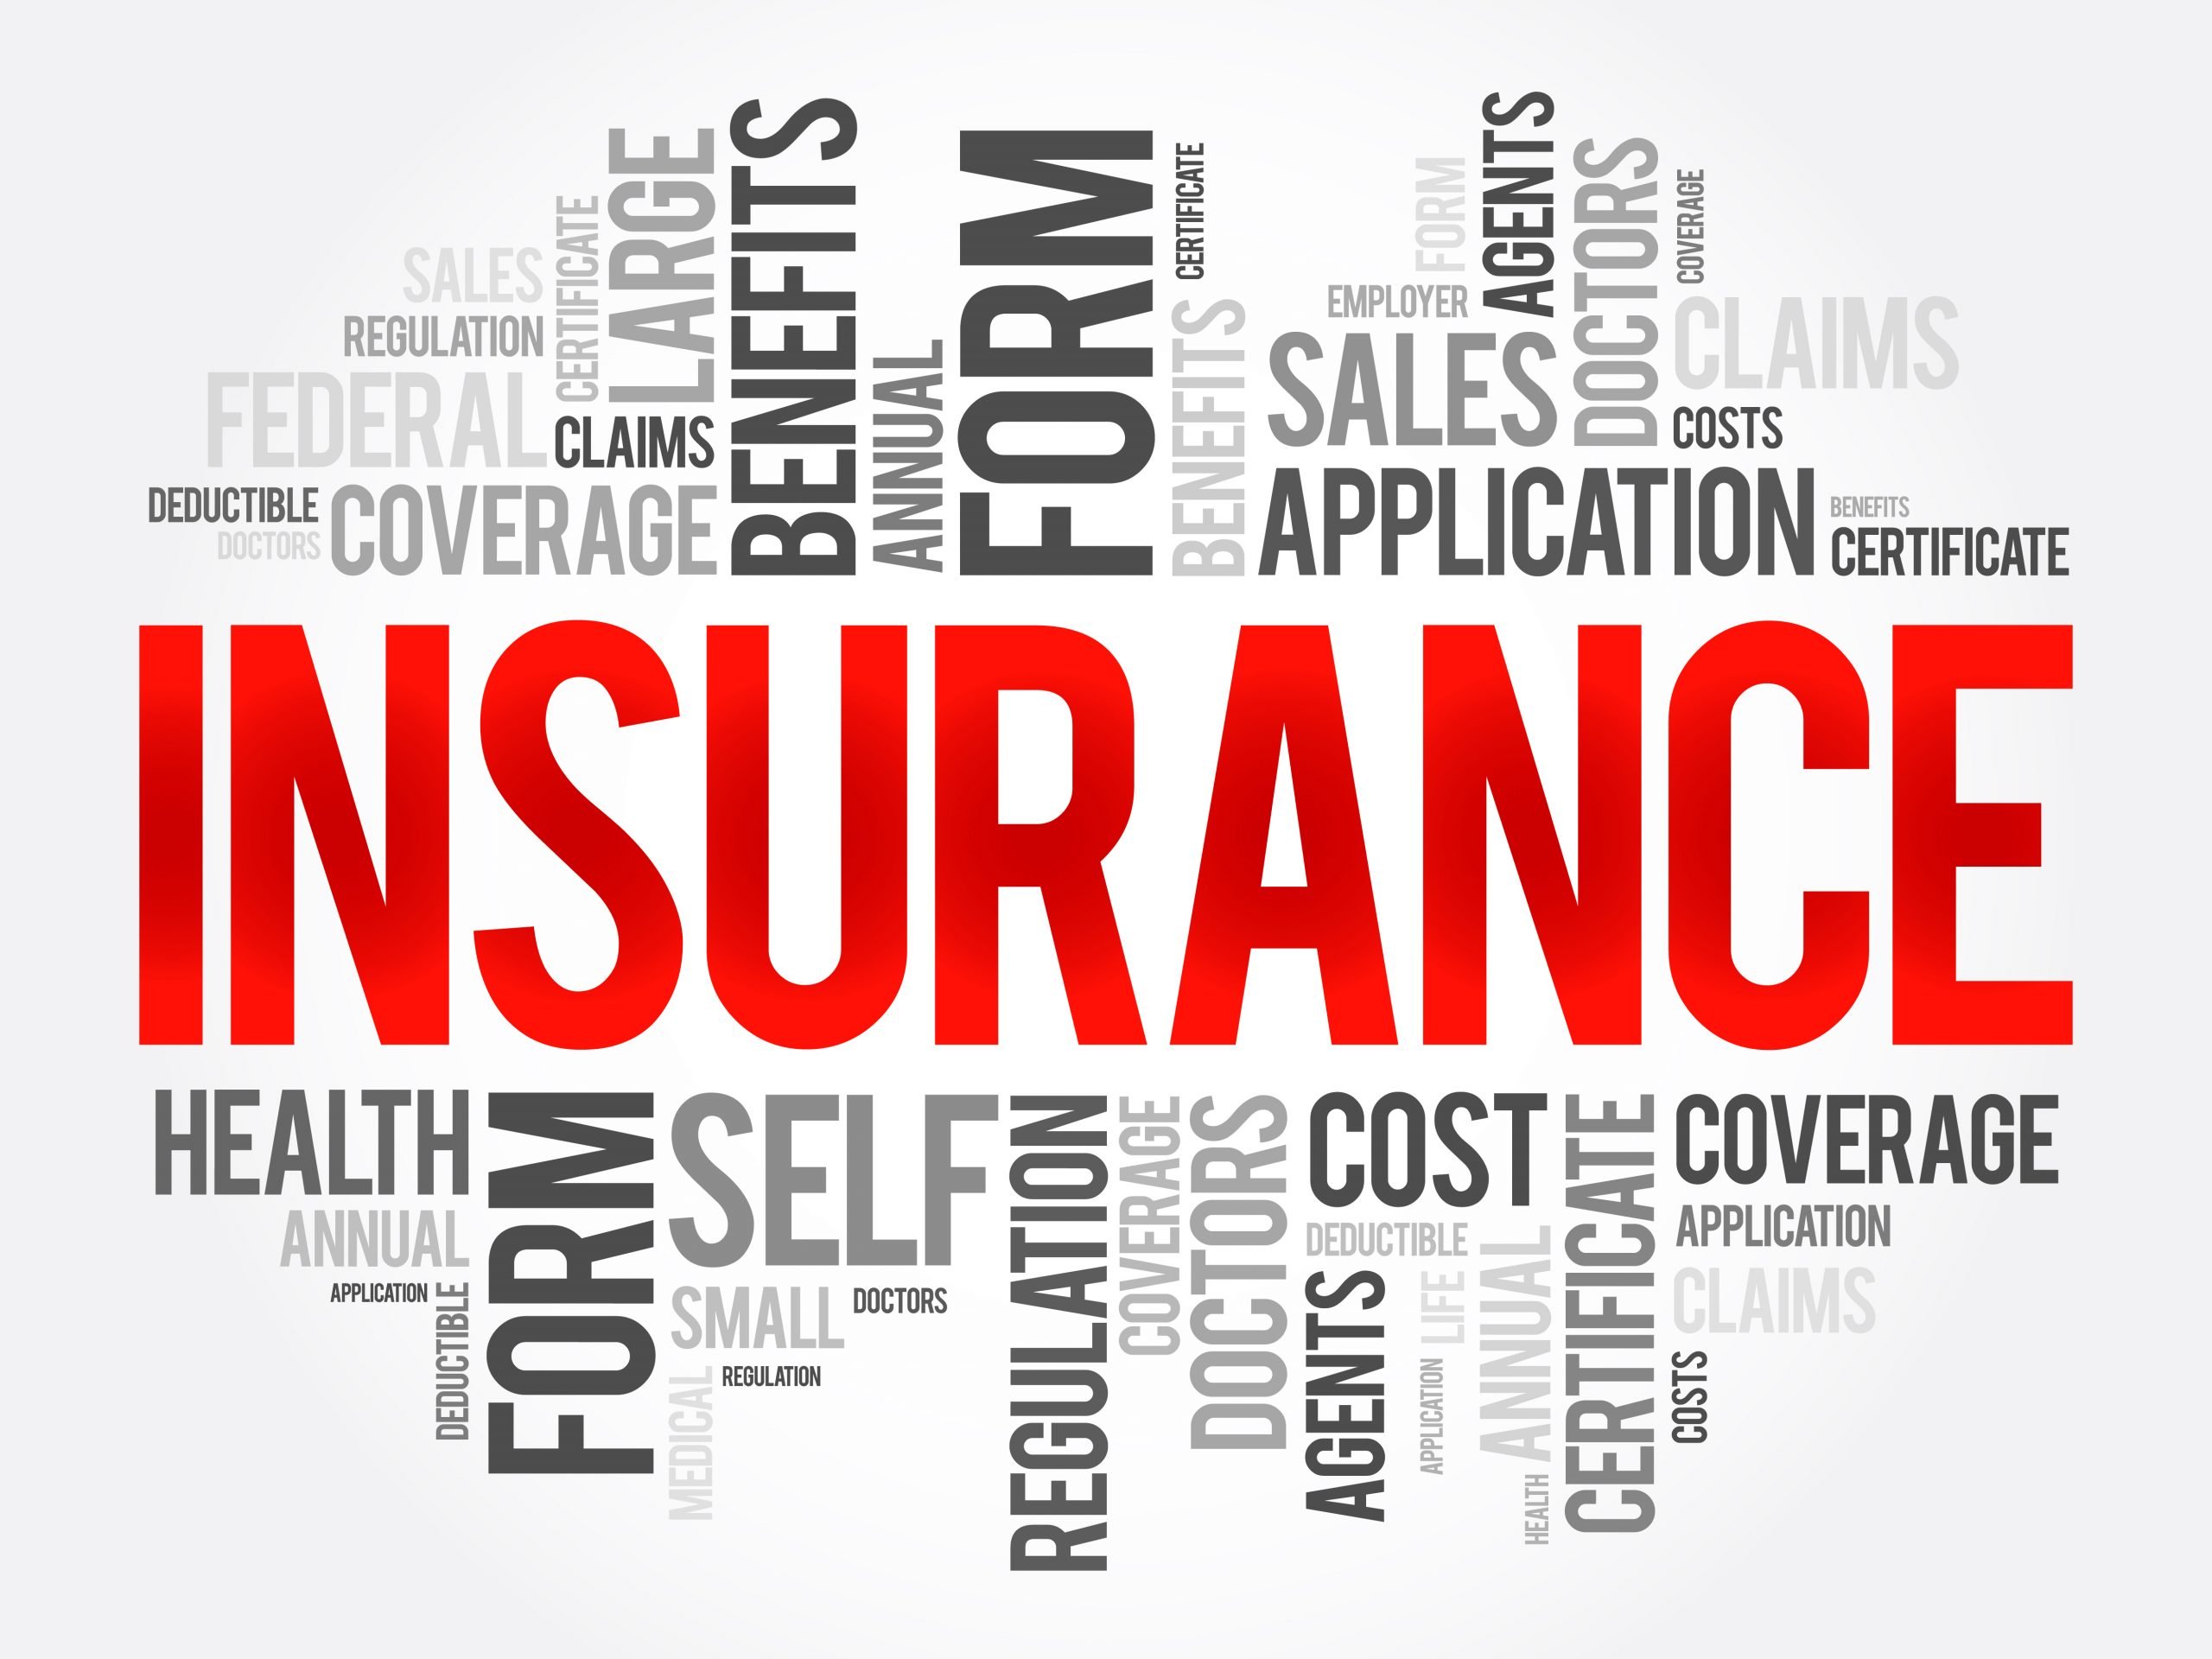 What Do Disability Insurance Benefits Cover?